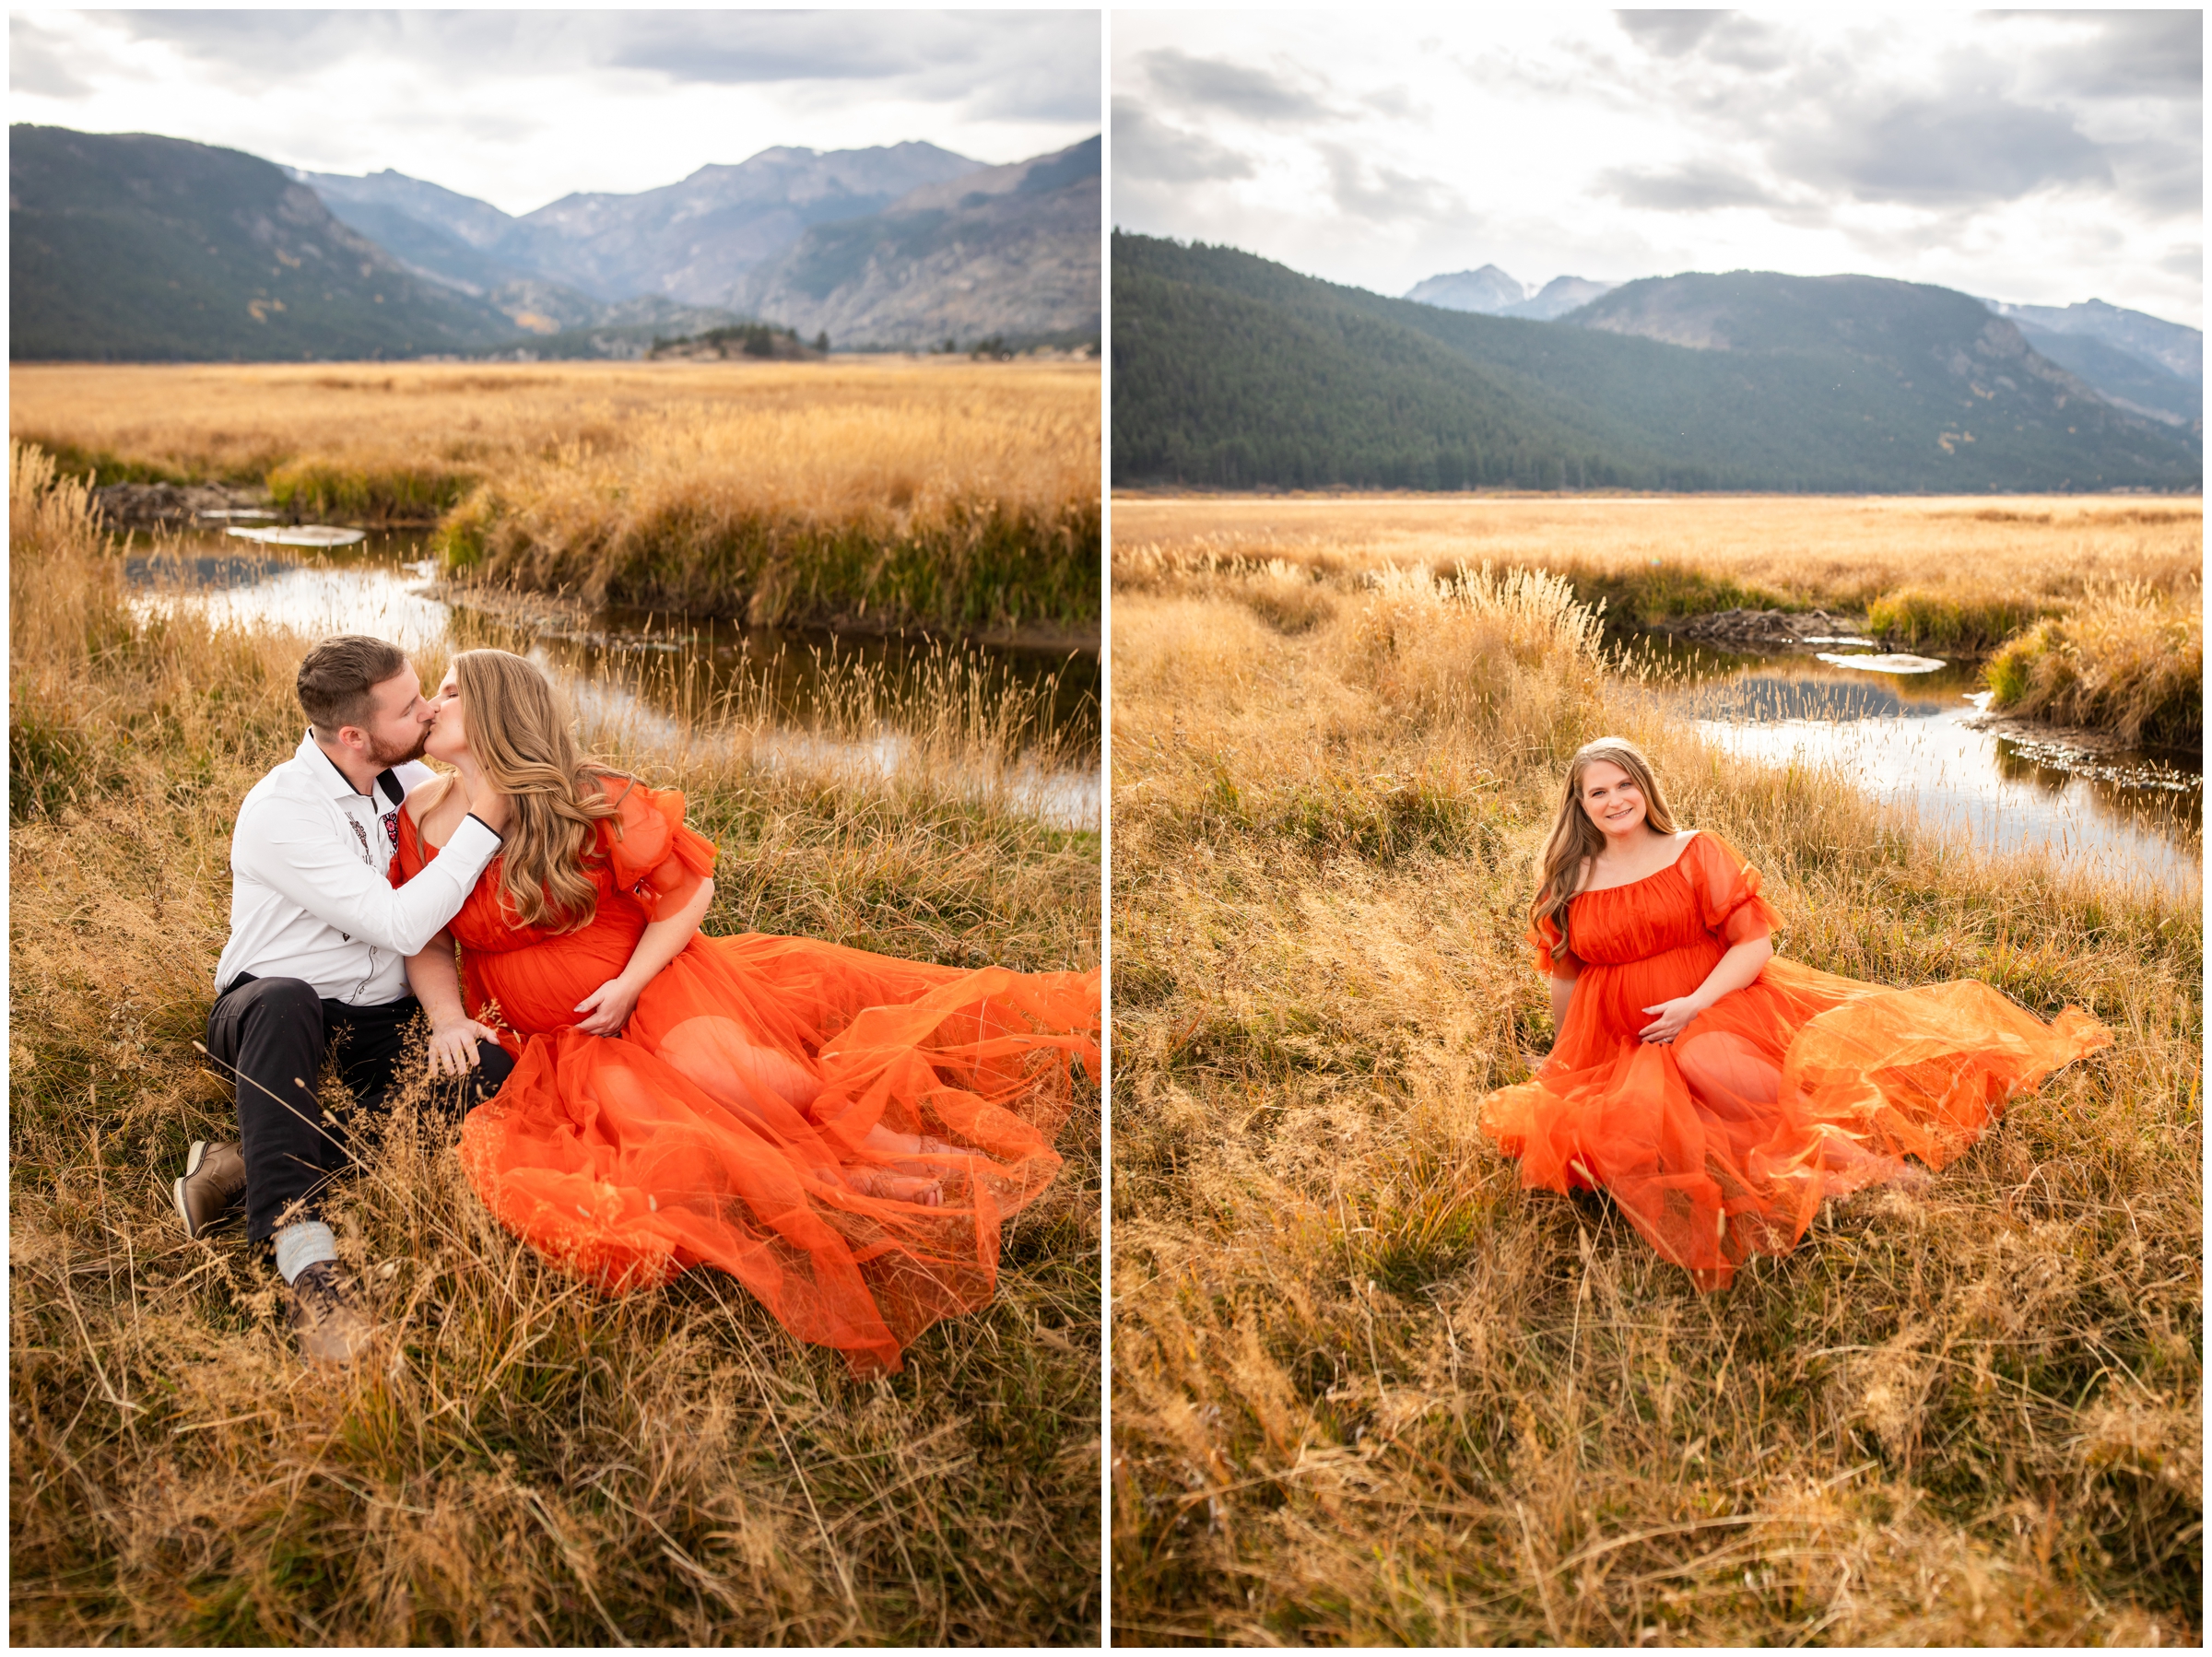 pregnant woman in orange dress sitting in mountain field during RMNP colorado maternity photos at Moraine Park 